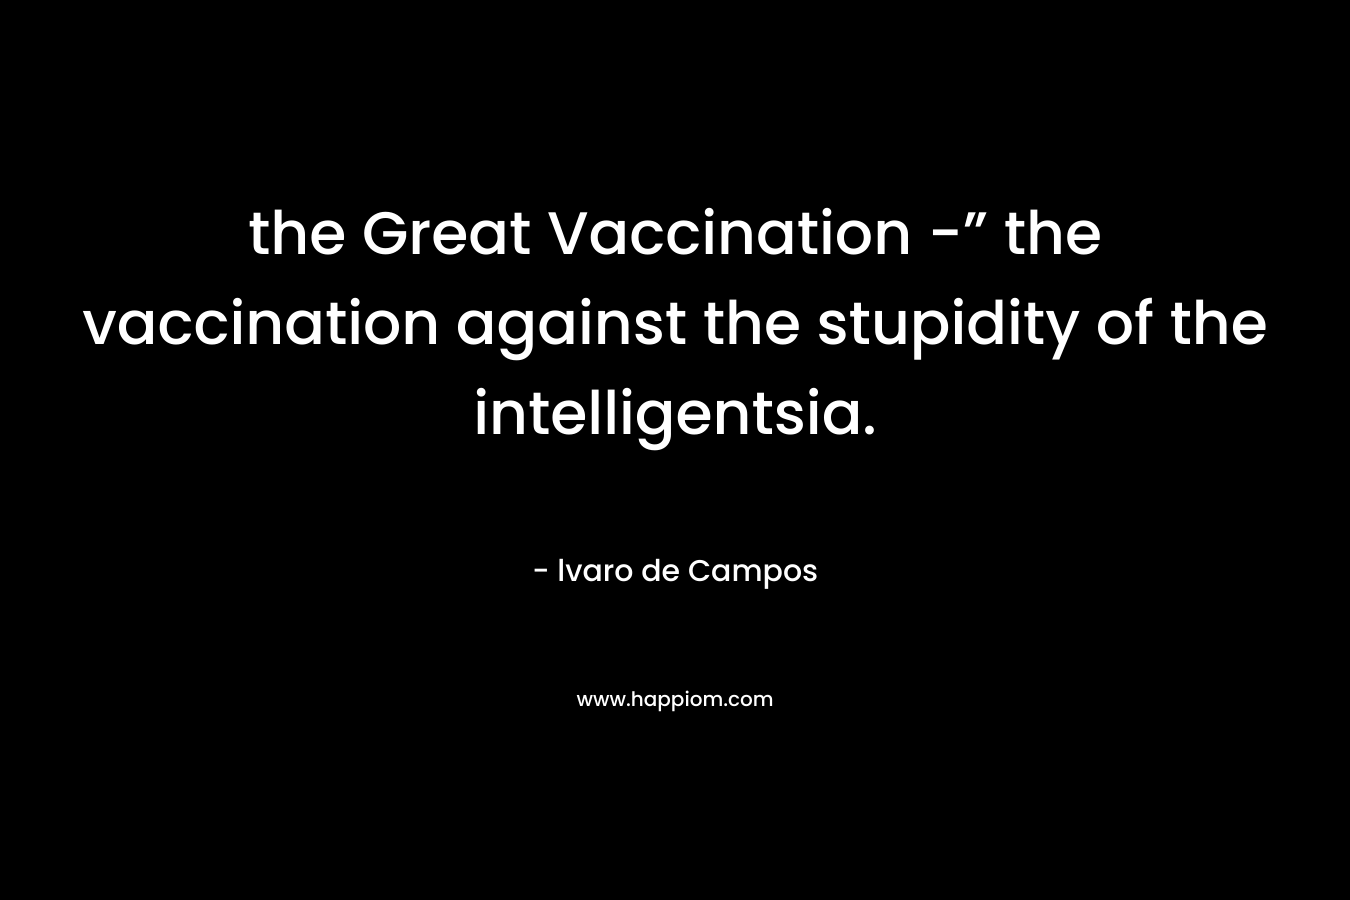 the Great Vaccination -” the vaccination against the stupidity of the intelligentsia.